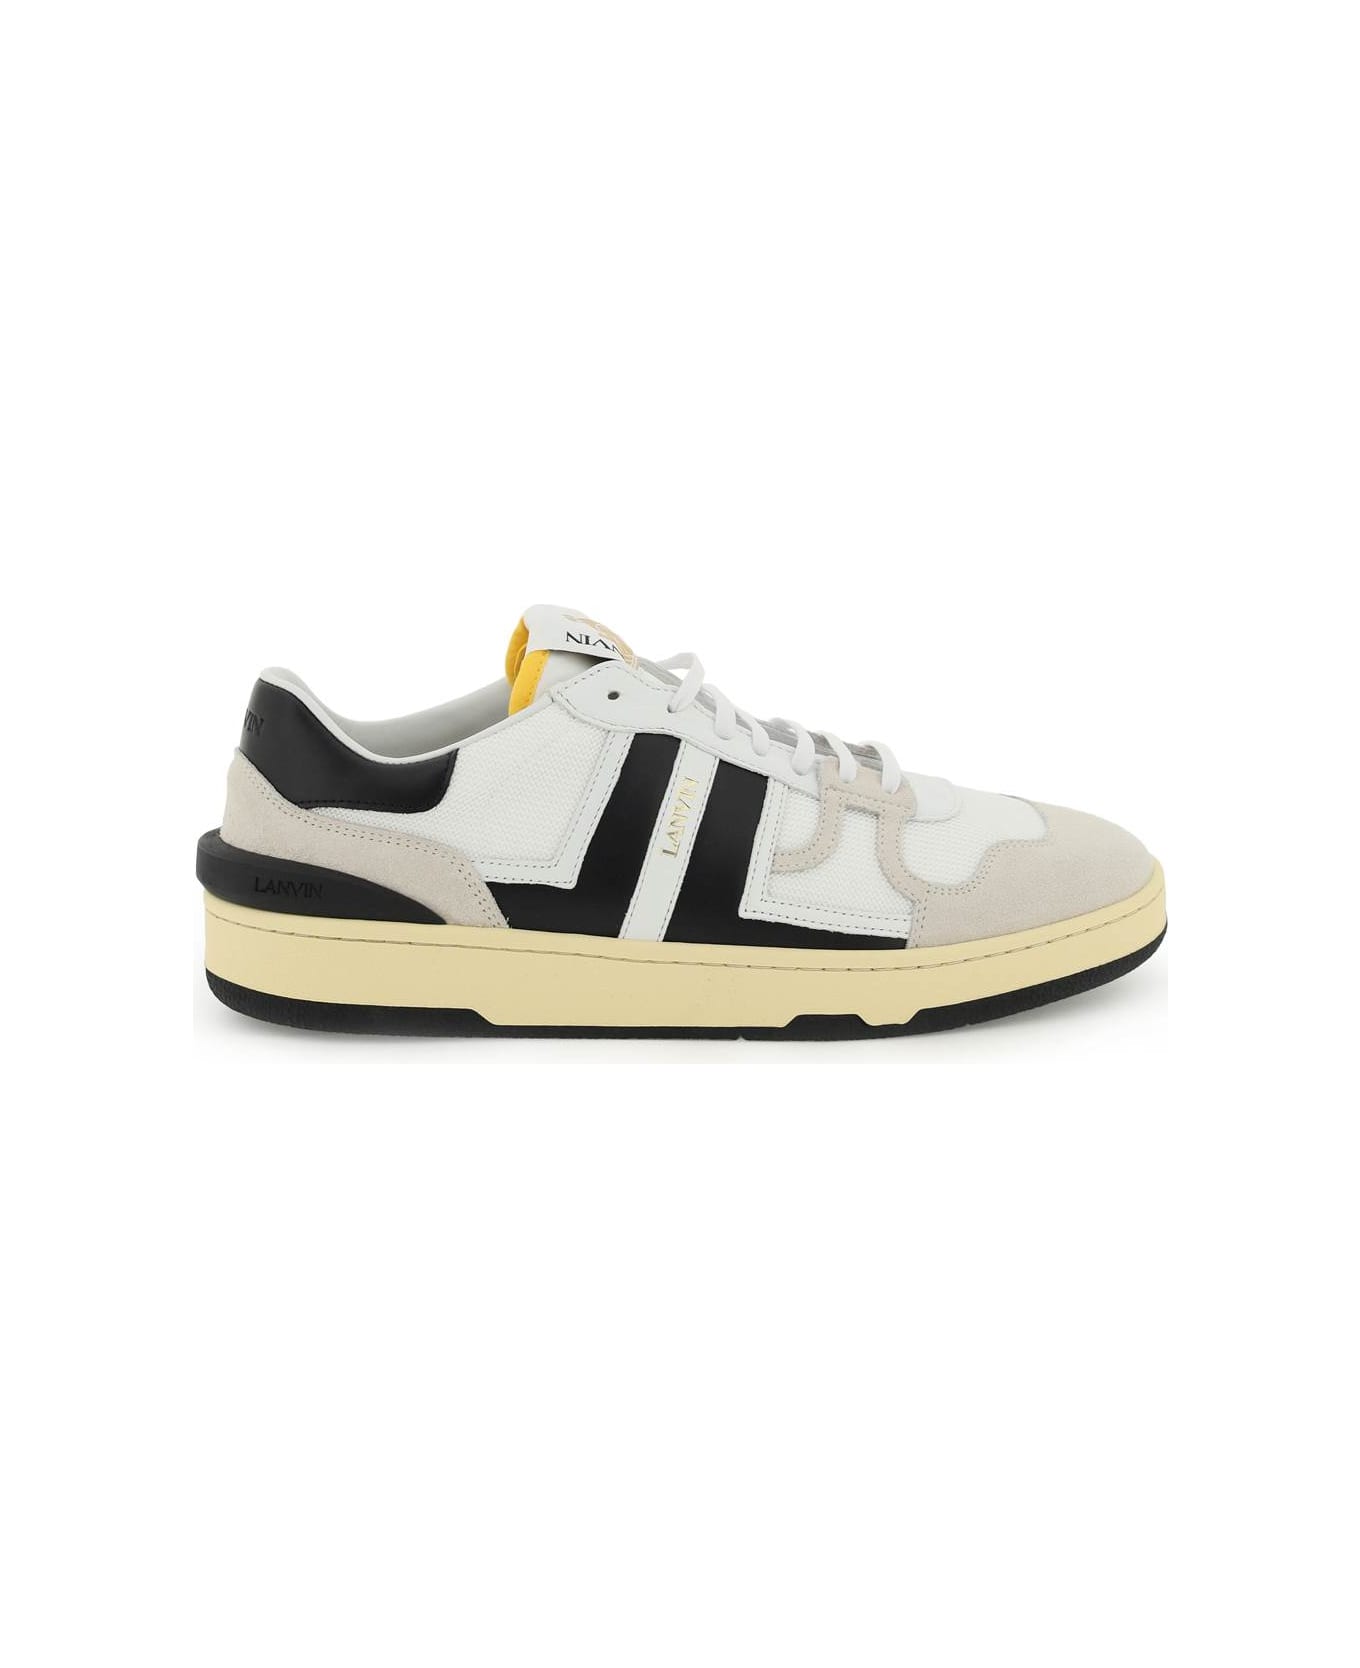 Lanvin Clay Sneakers - White スニーカー